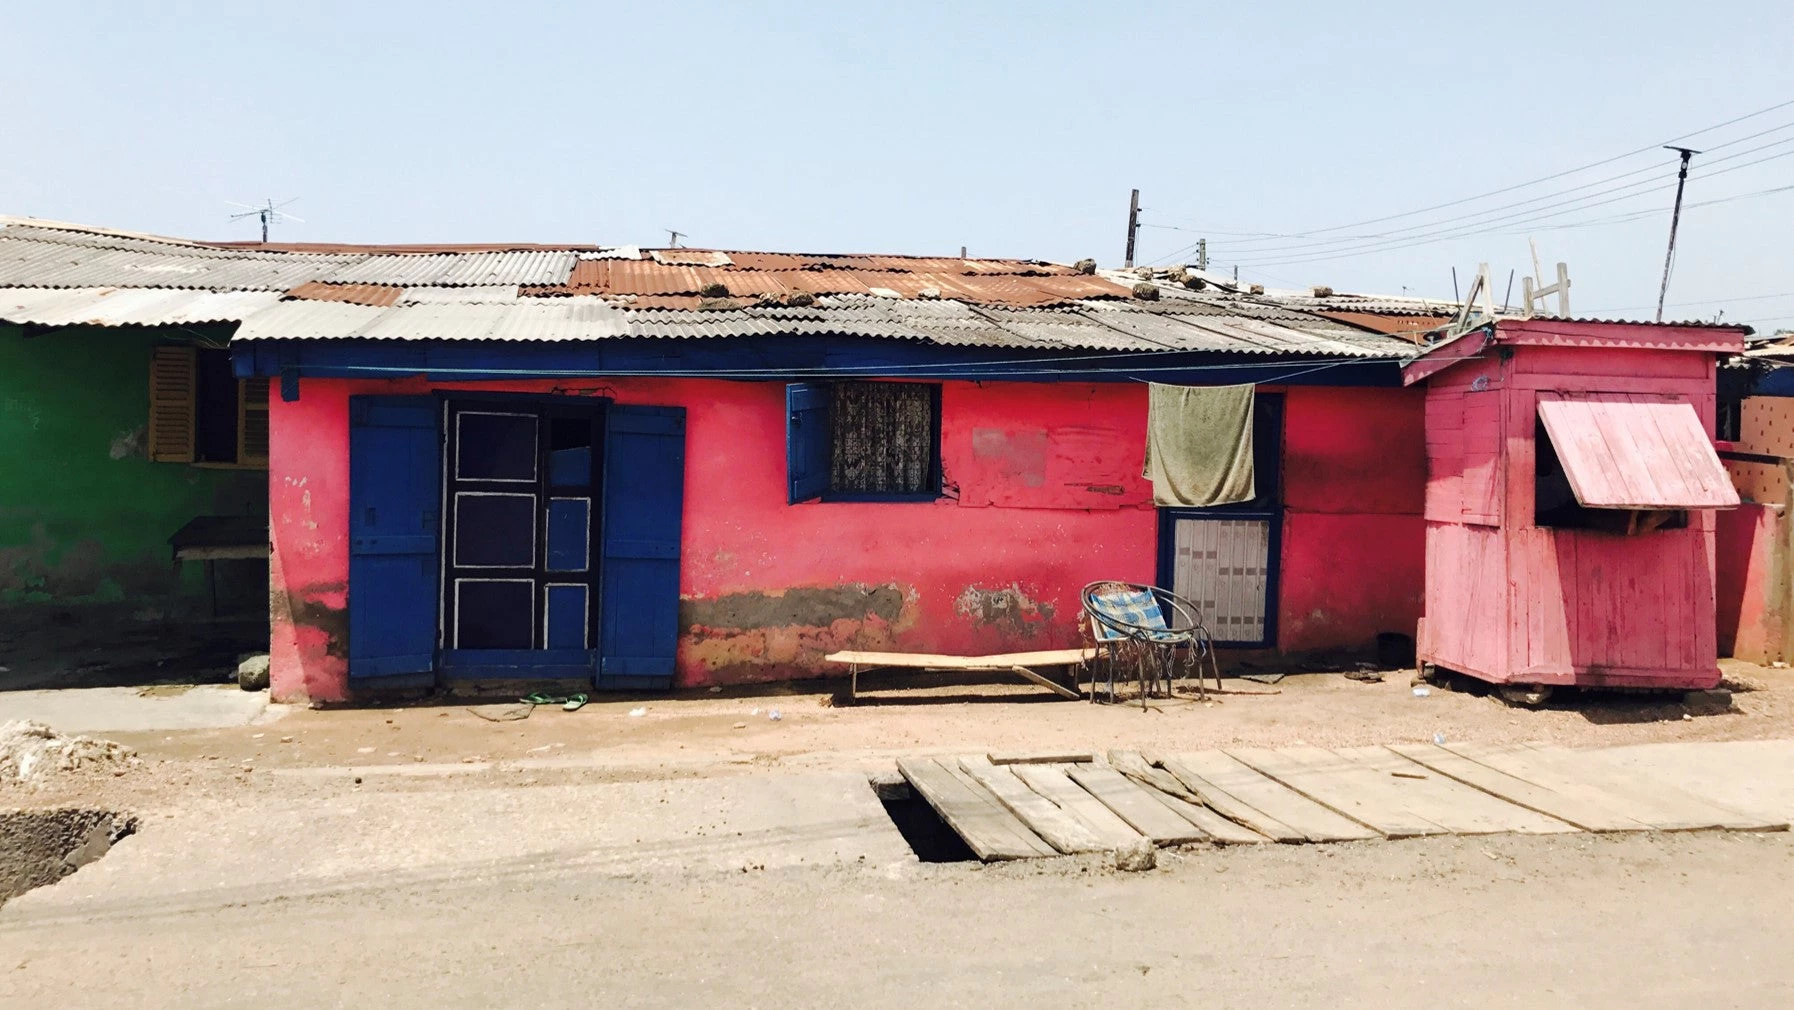 Photo of a household in Ghana